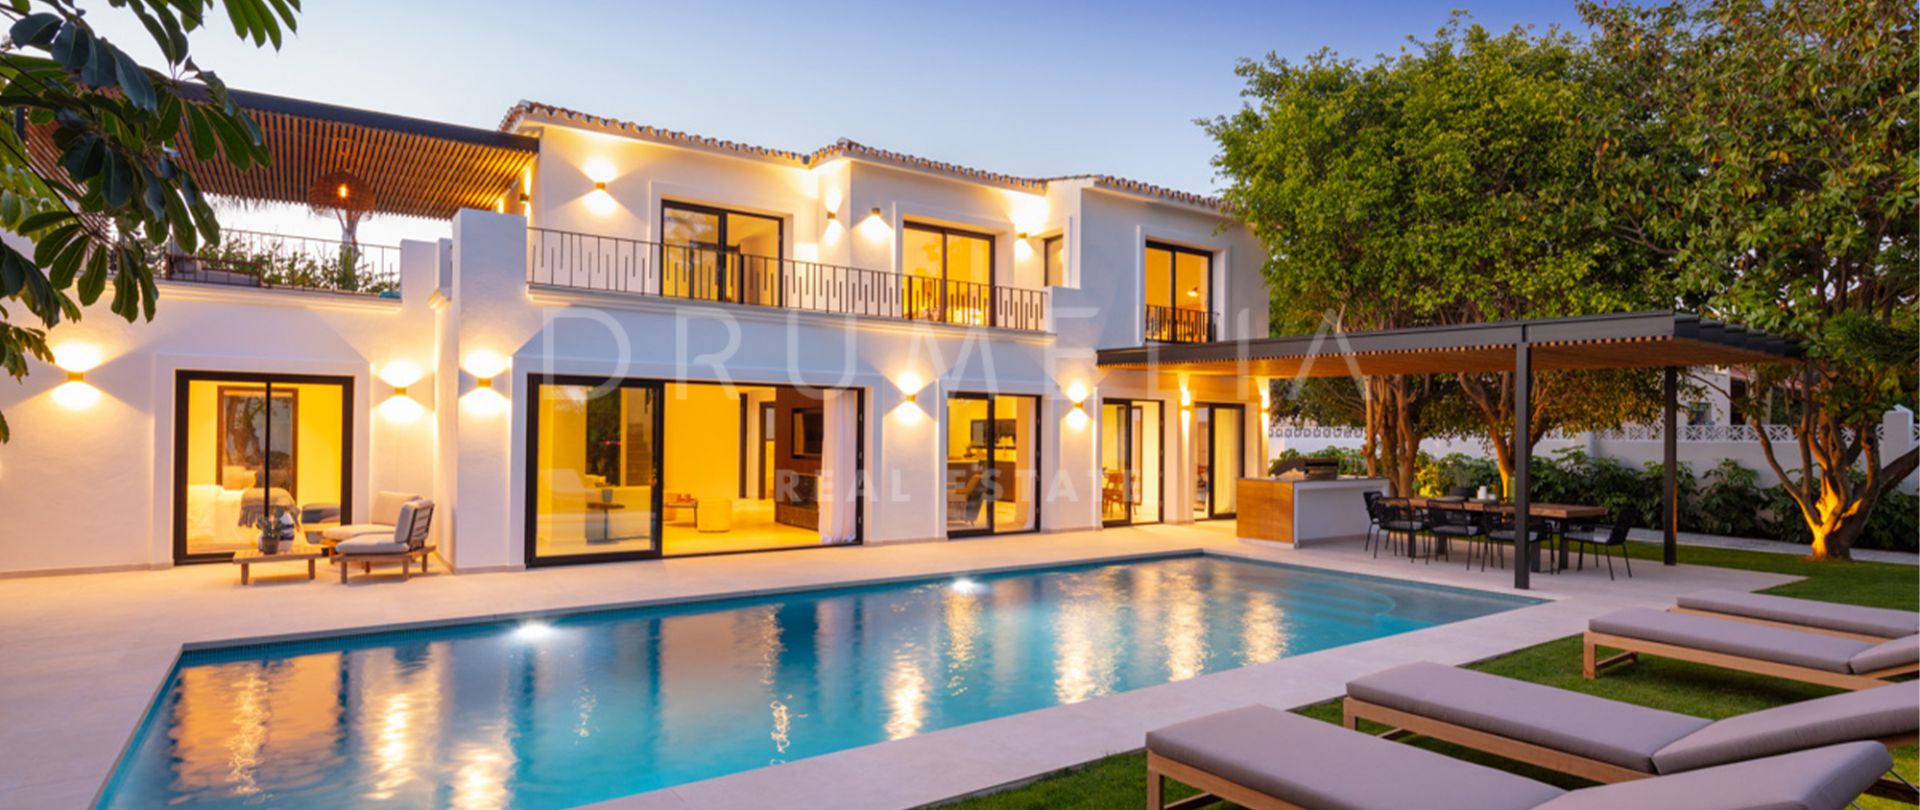 Newly renovated luxury villa just a few steps to the beach in Cortijo Blanco Puerto Banus